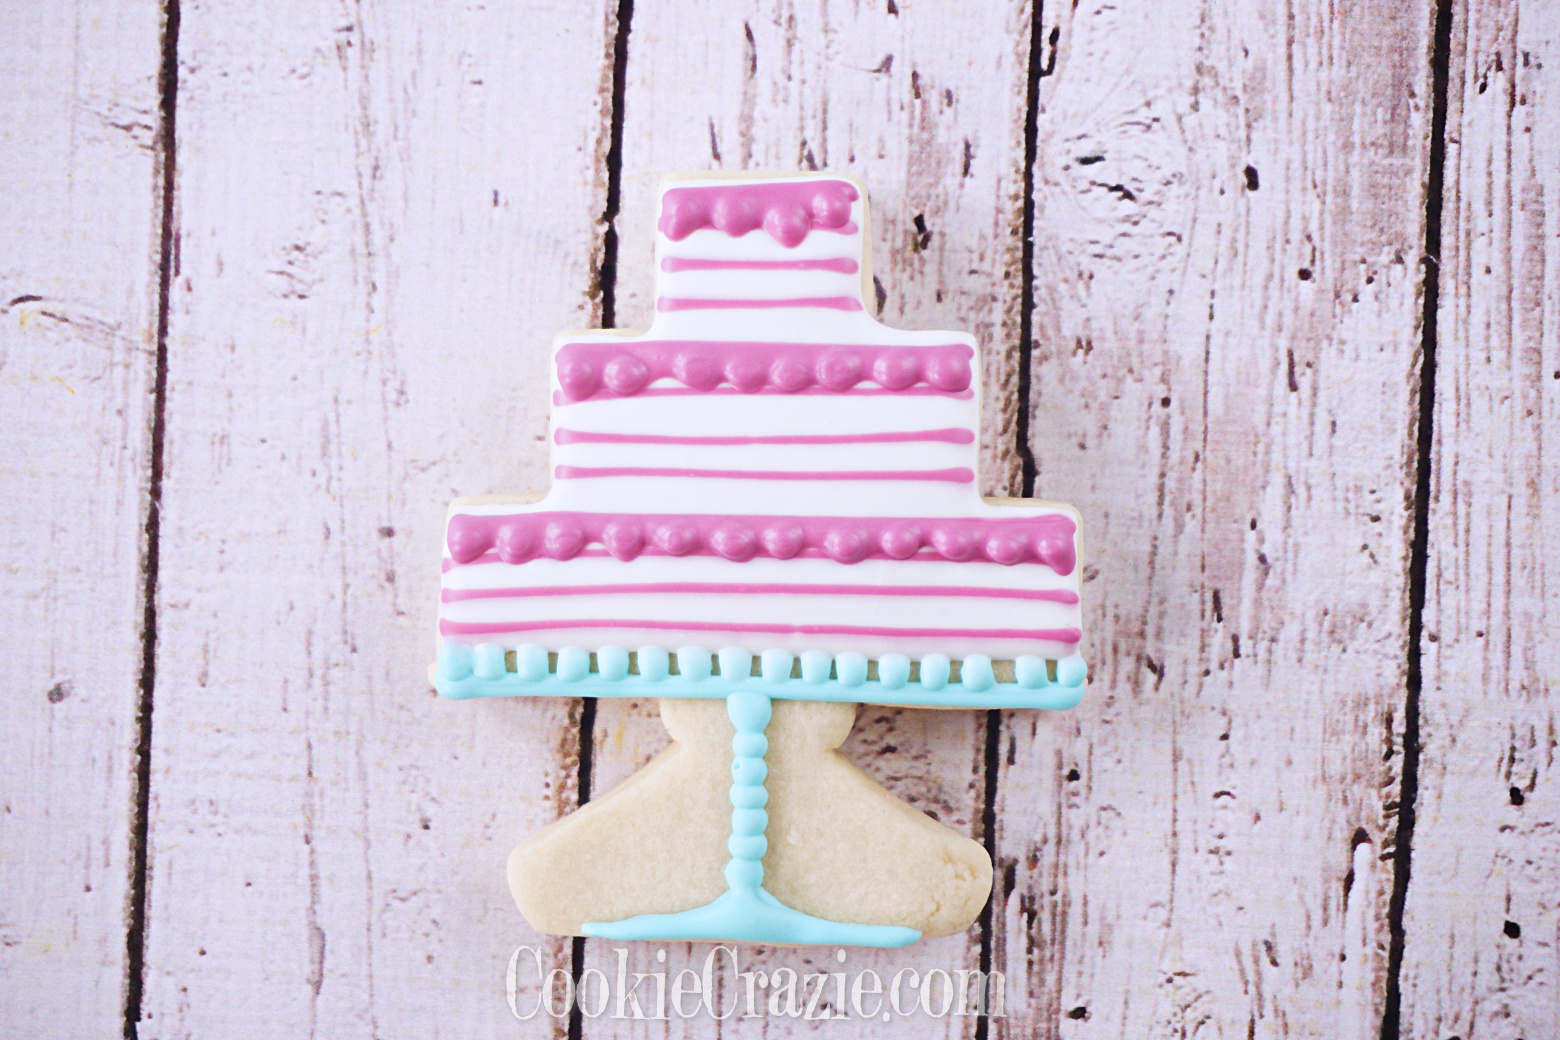  Happy Birthday 3 Tier Pedestal Cake Decorated Sugar Cookie YouTube video  HERE  